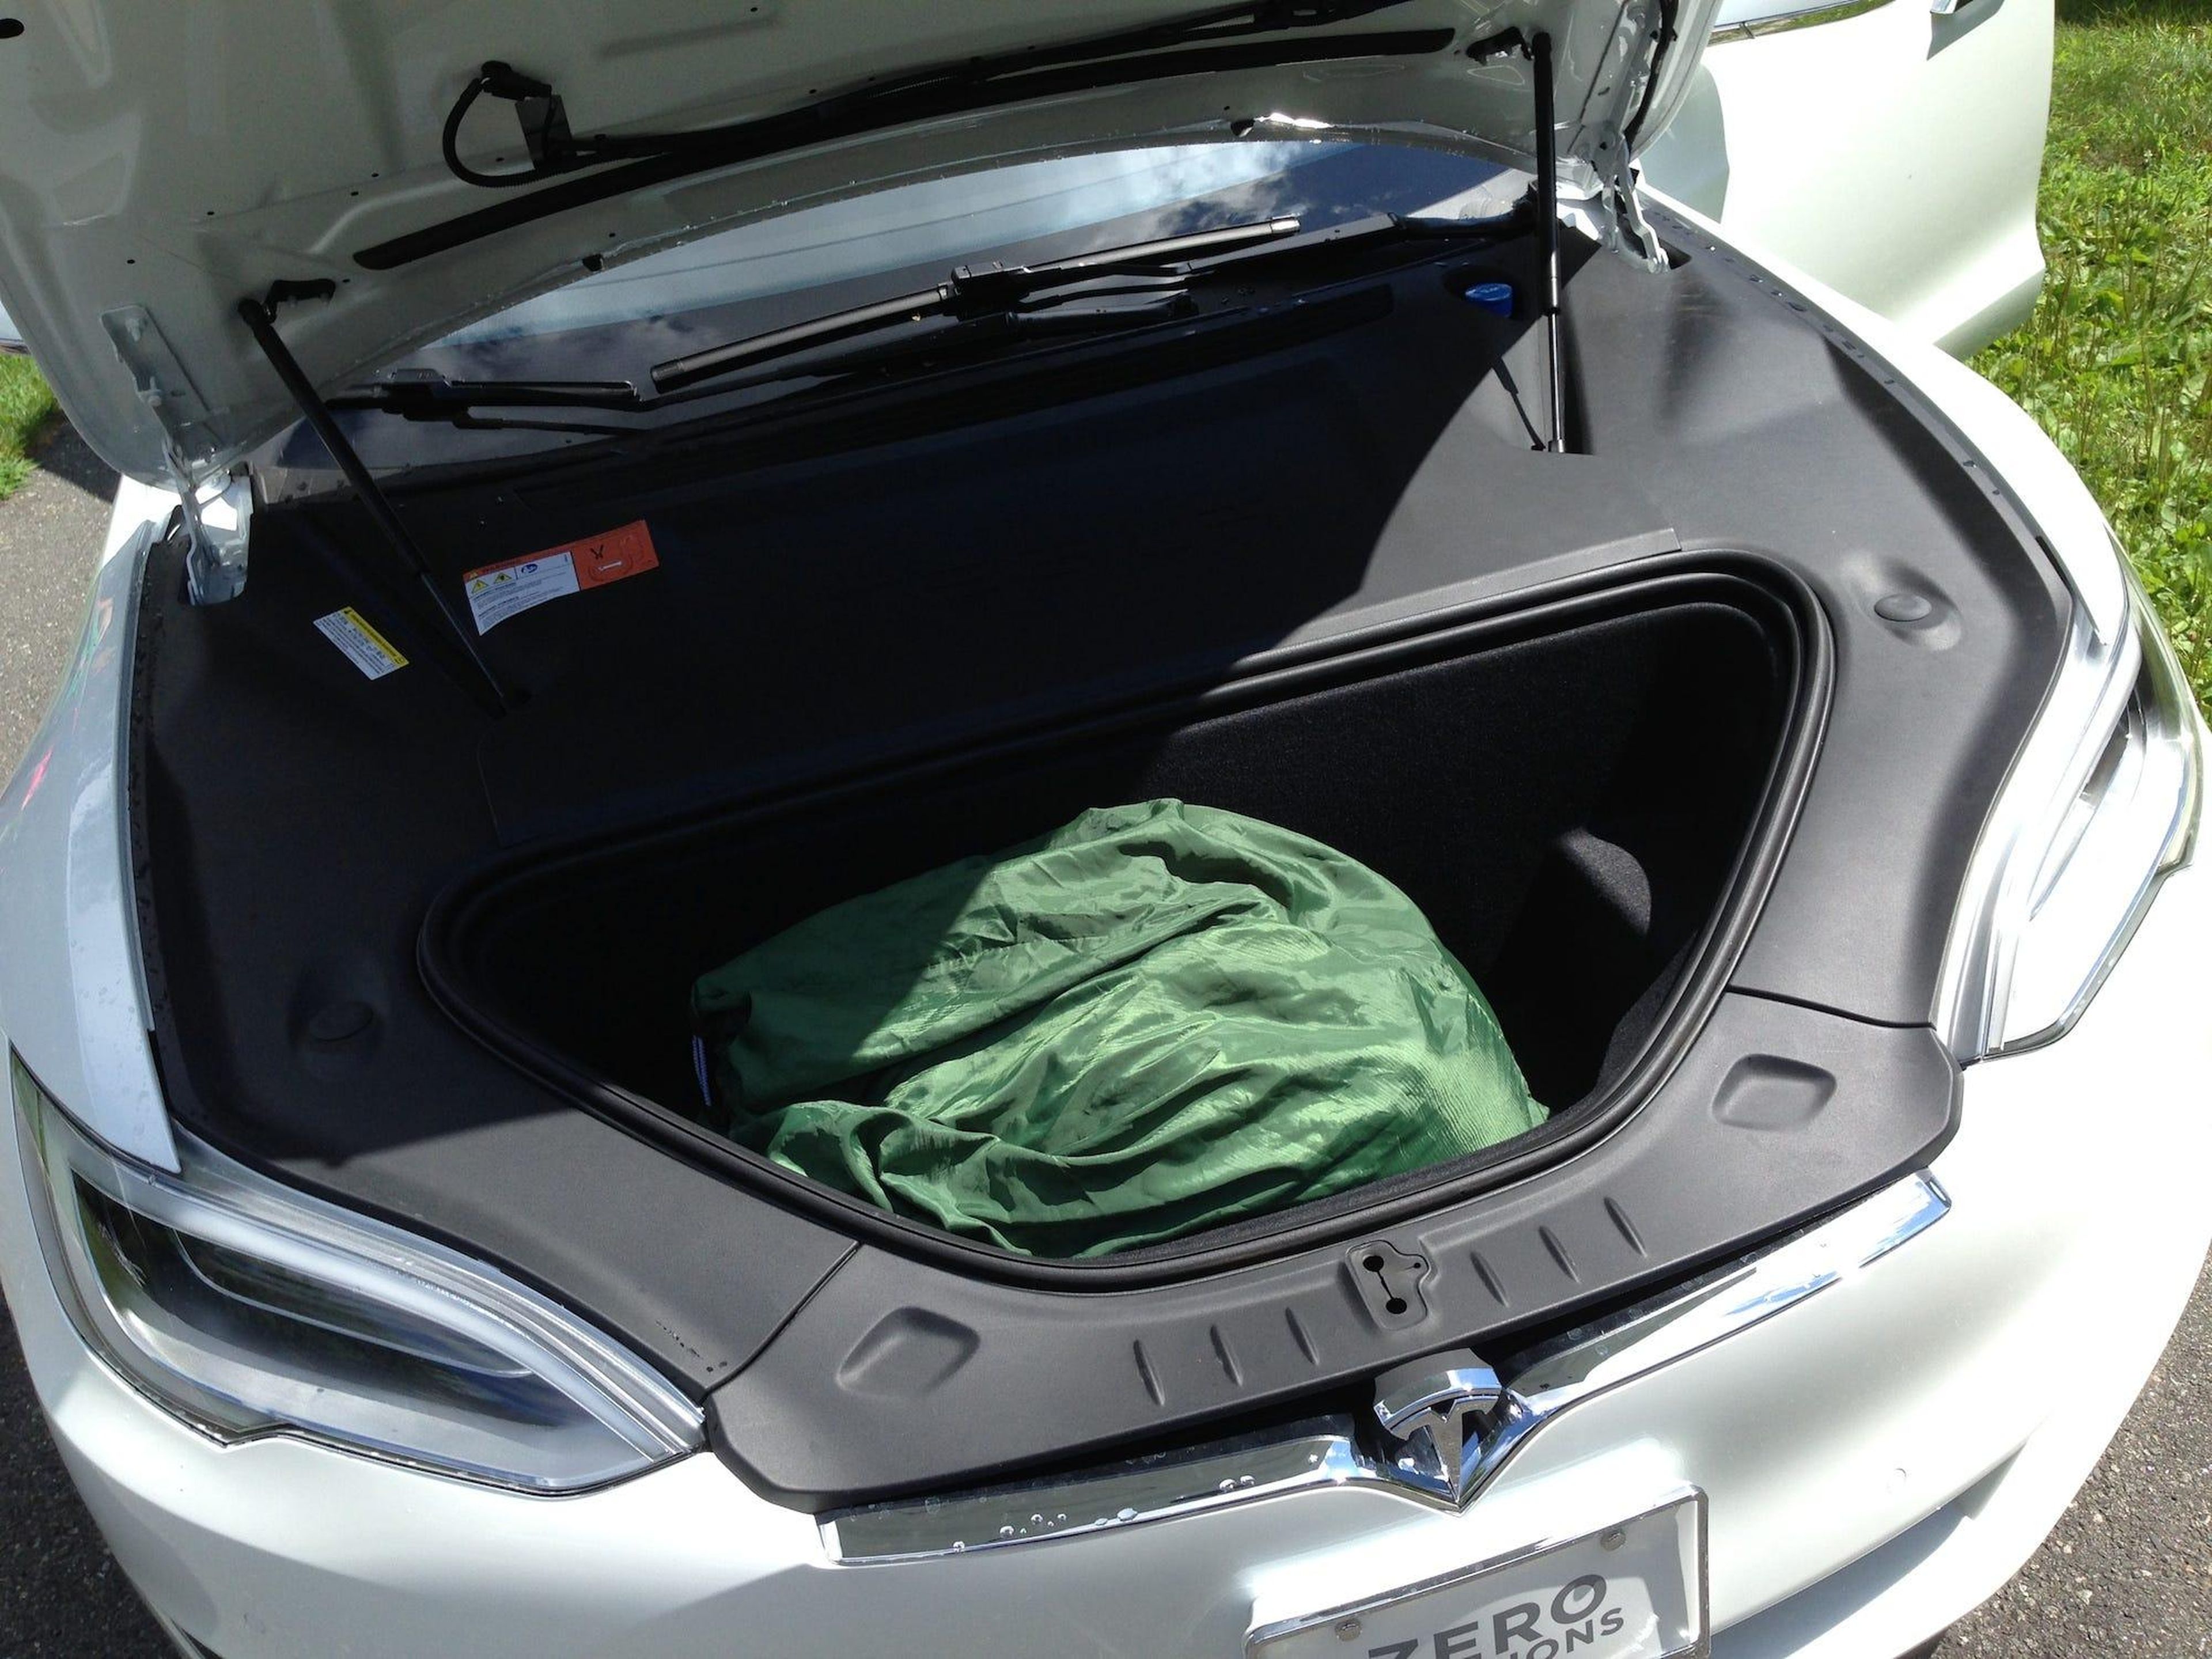 You have almost 63 cubic feet of total cargo capacity with the Model S, if you drop the rear seats to expand the hatch and make use of the front trunk, or "frunk." The Model S can beat some SUVs for hauling capability.